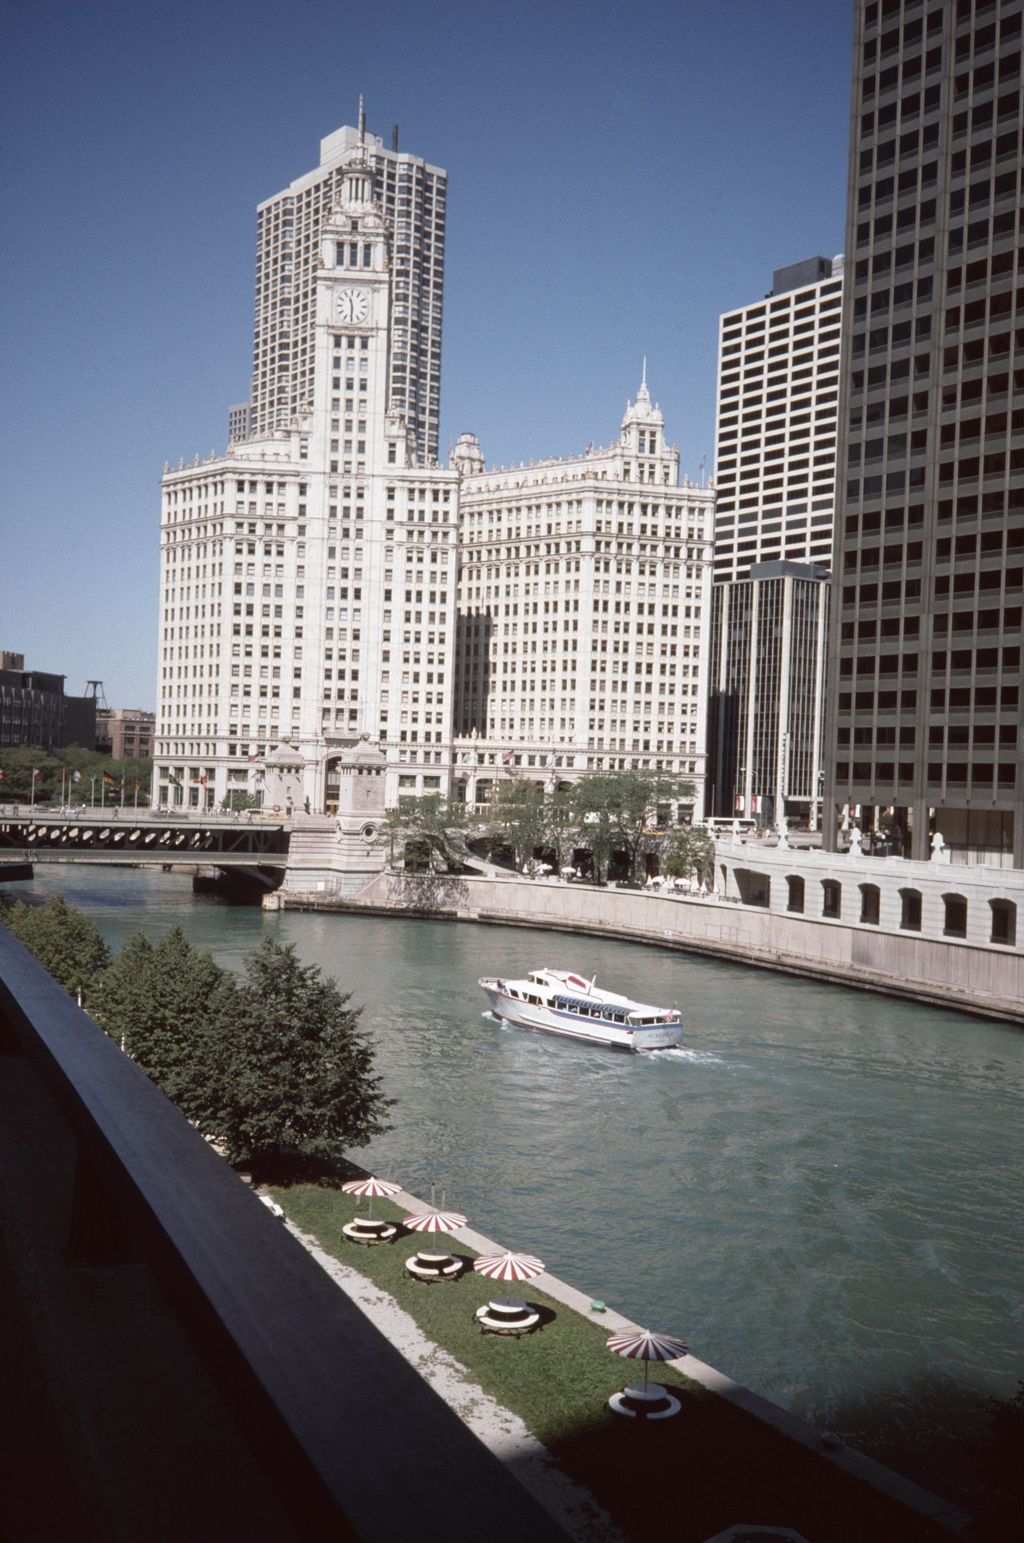 Miniature of Chicago River and Wrigley Building